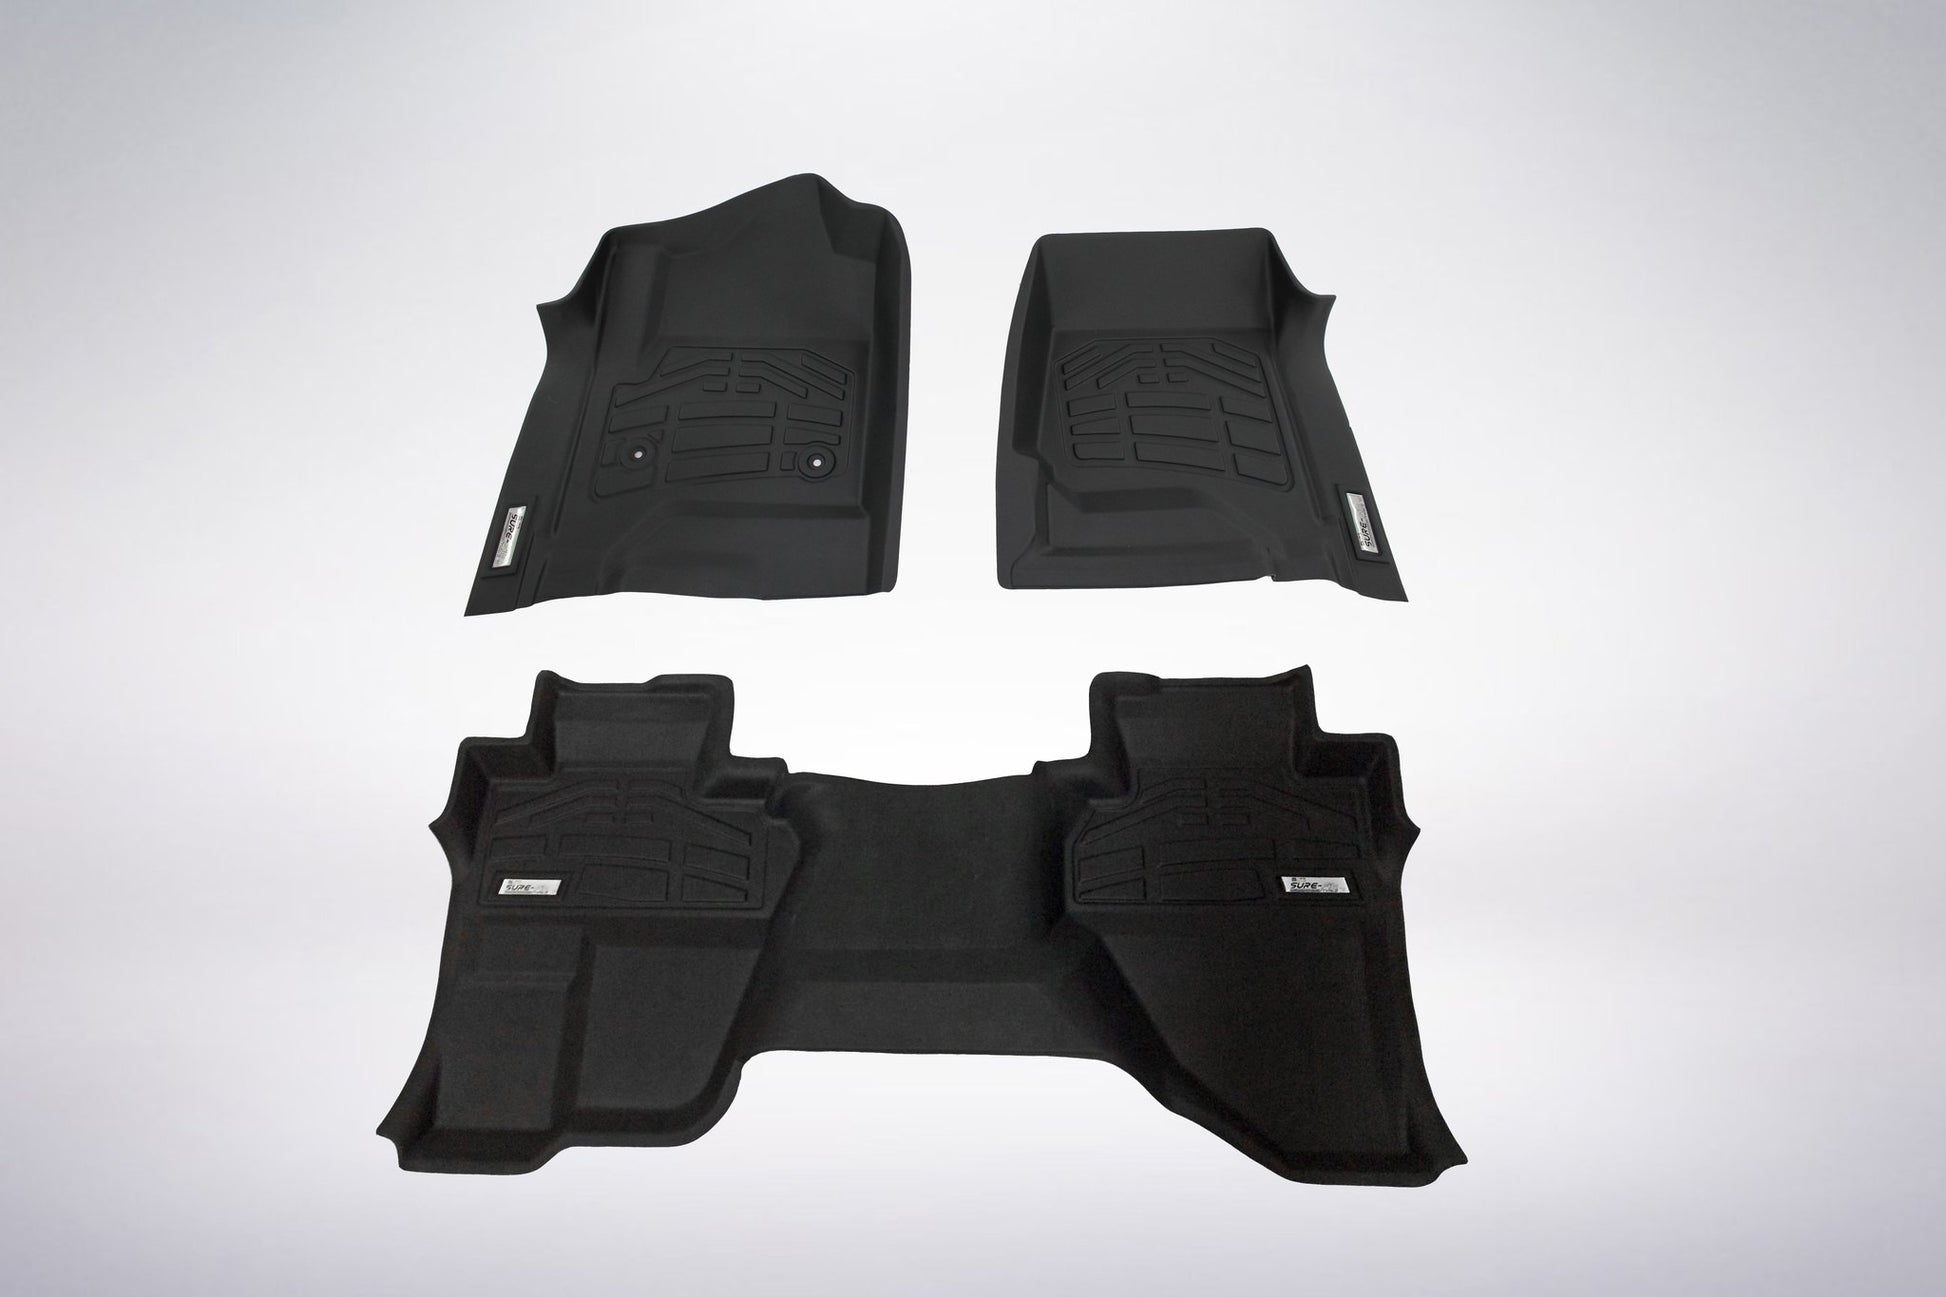 Black First & Second Row Floor Mats for 2017 Chevrolet Silverado 1500/2500/3500 Double Cab